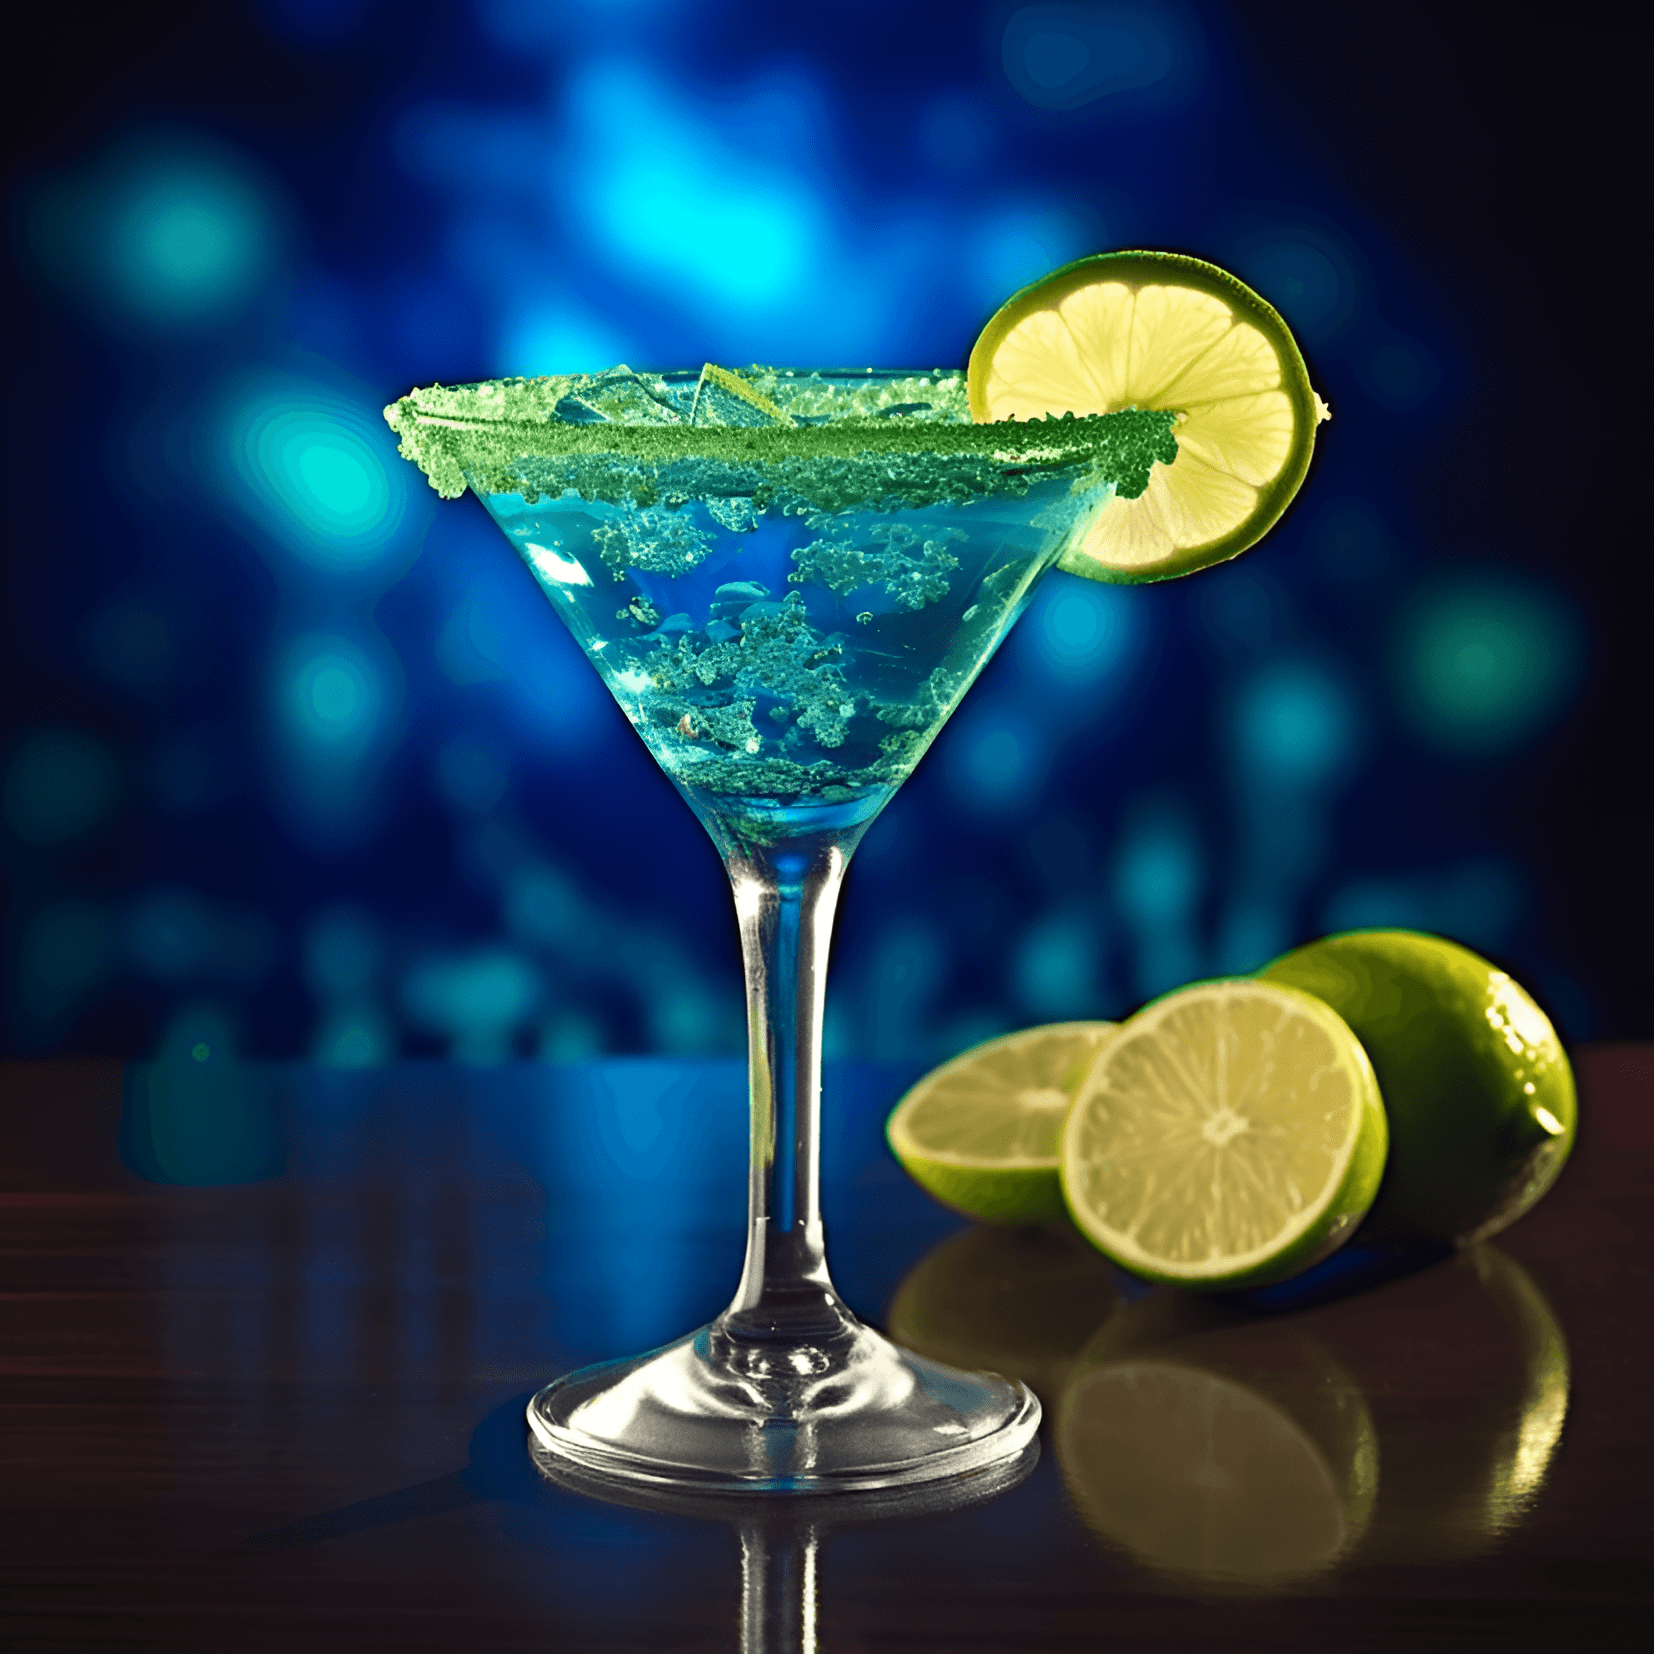 Flying Kamikaze Cocktail Recipe - The Flying Kamikaze has a tangy, citrusy taste with a hint of sweetness. It's a well-balanced combination of sour, sweet, and strong flavors, making it a refreshing and invigorating cocktail.